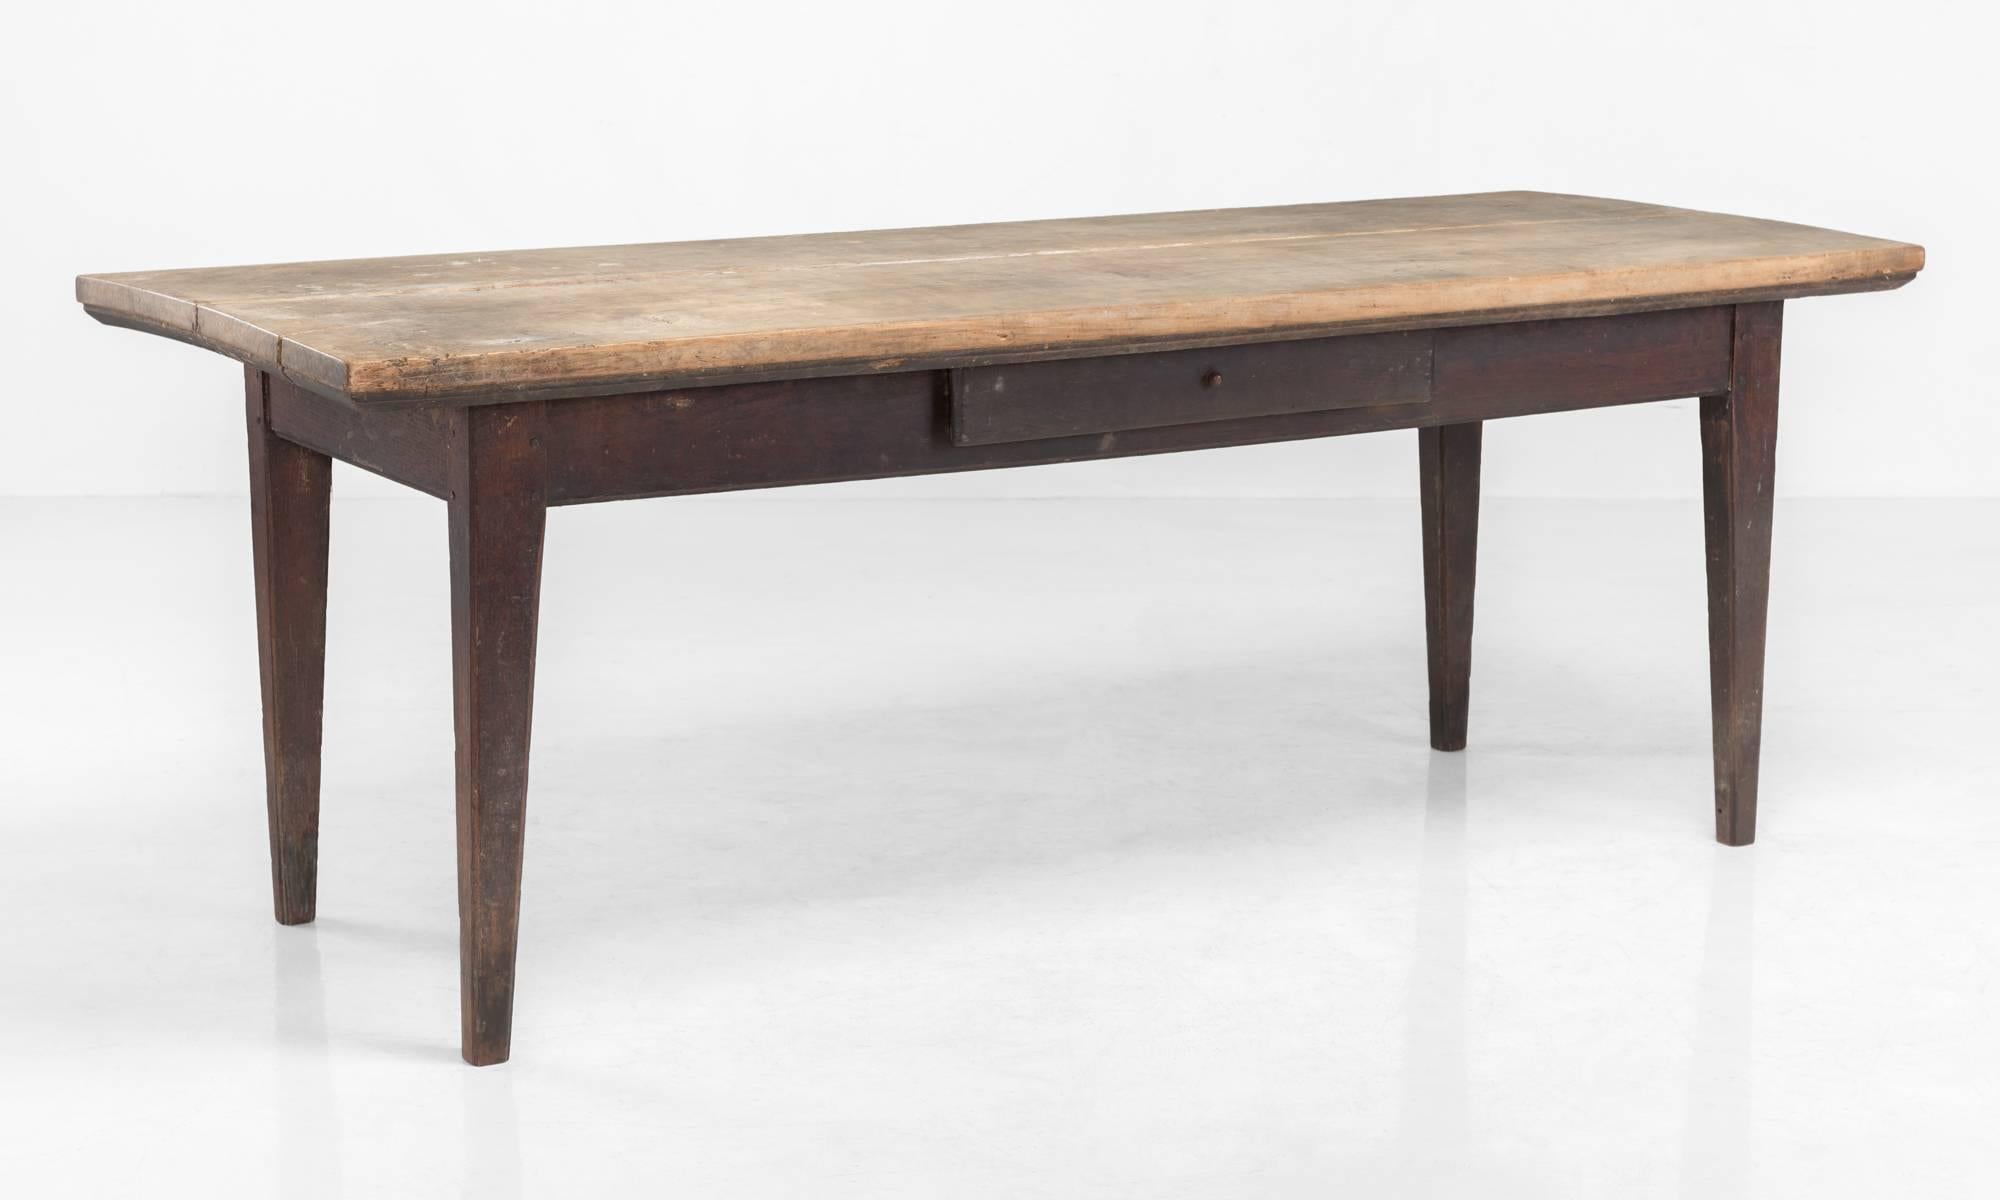 Twin Plank Table with Drawer, England, circa 1900

Substantial top with wonderful patina and pull-out drawer.